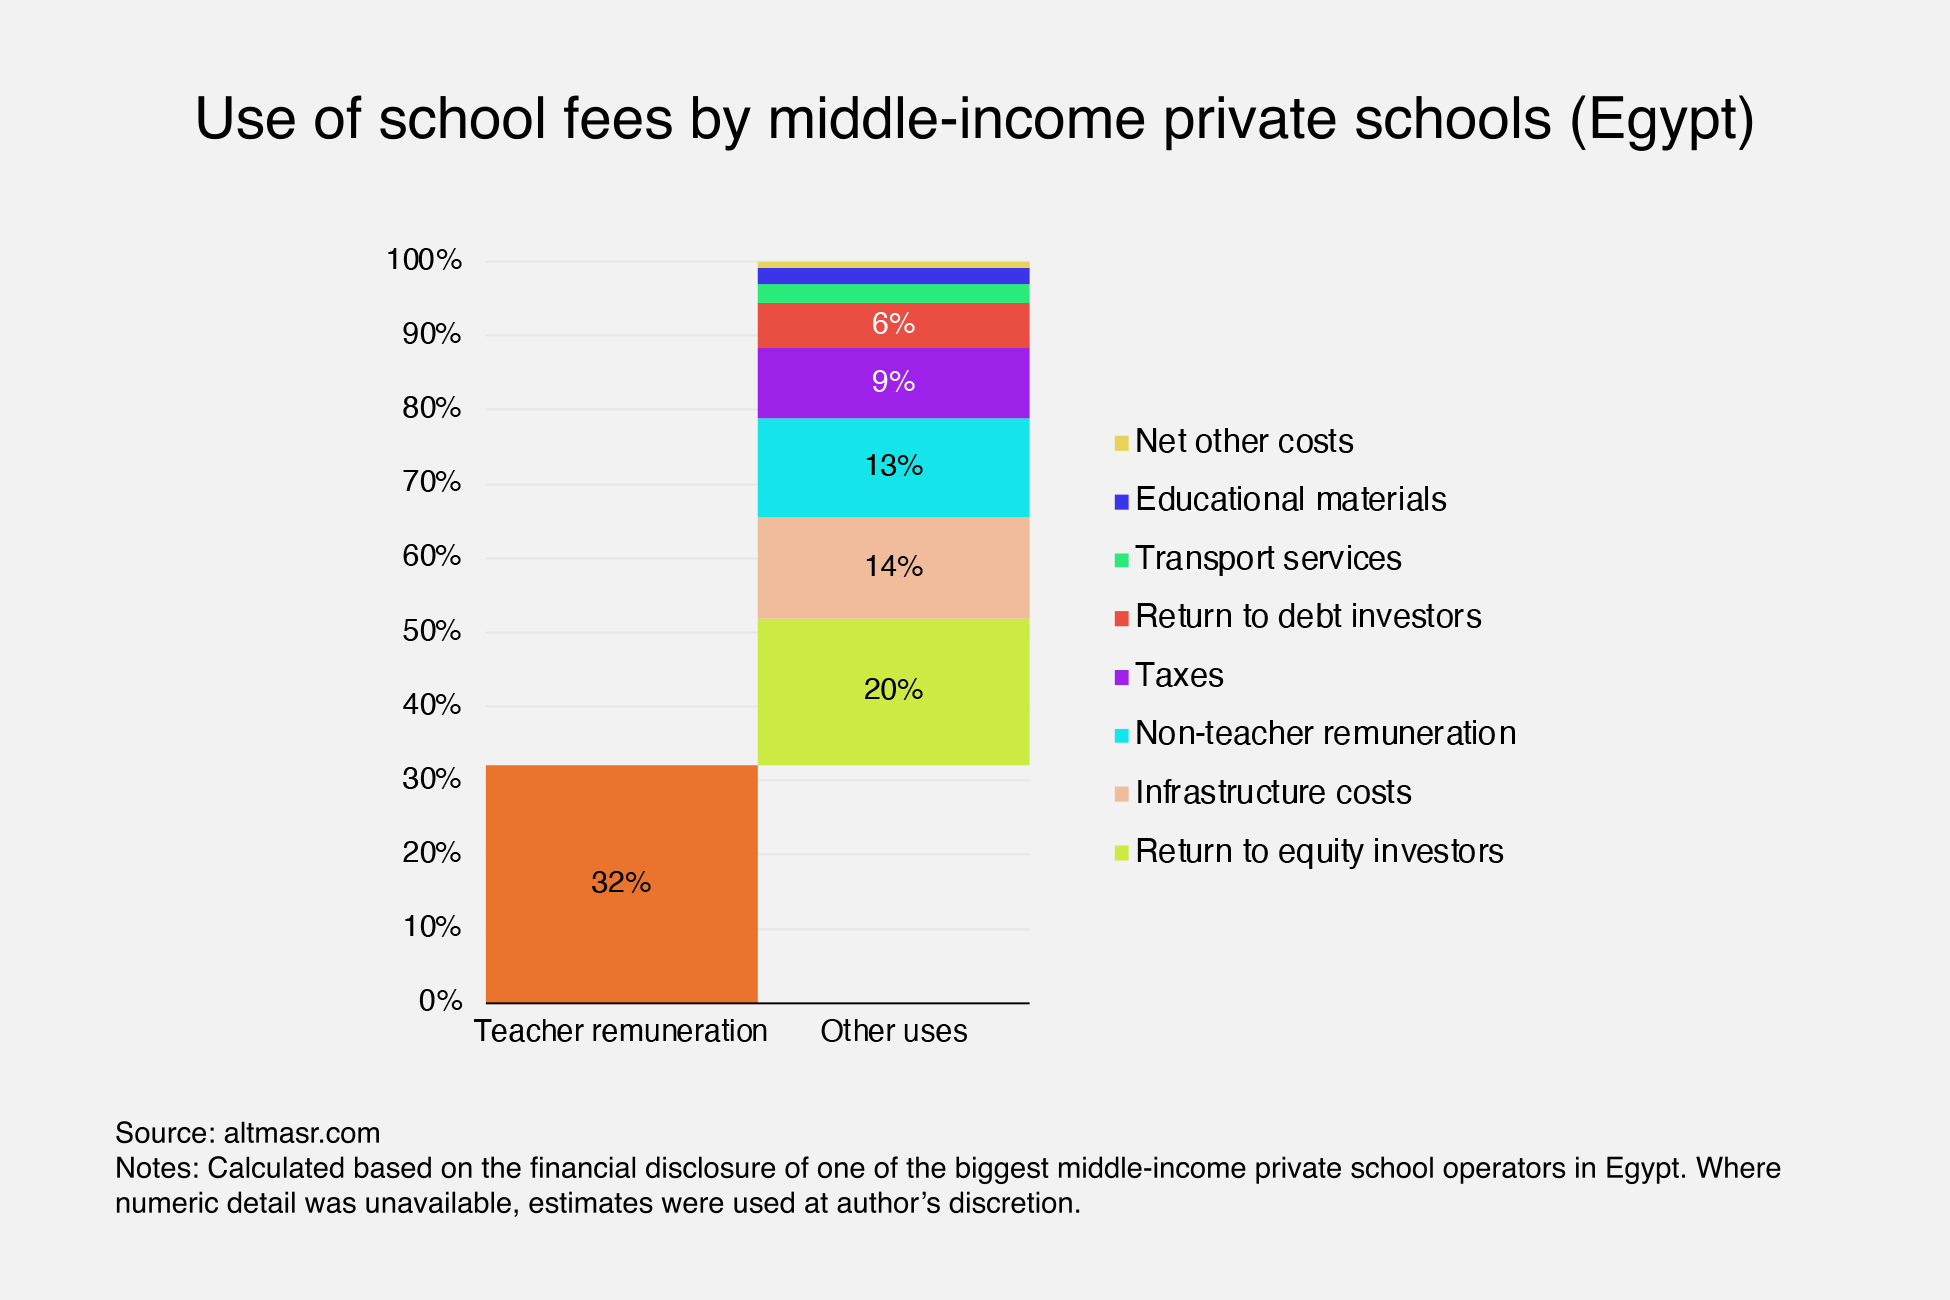 Use of school fees by middle-income private schools in Egypt